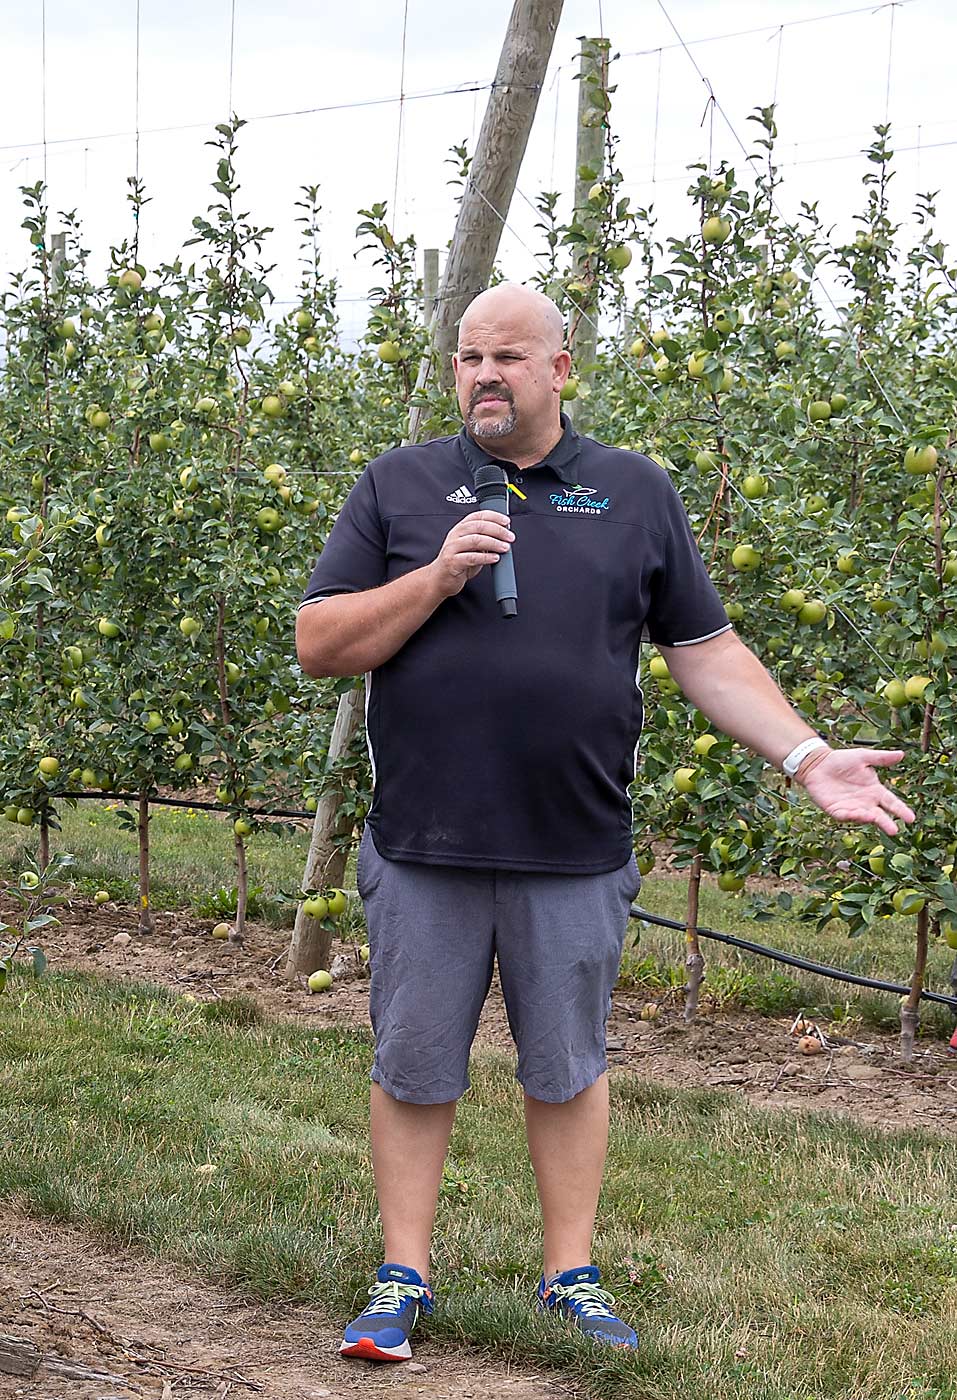 New York grower Jason Woodworth hosted an orchard tour at one of his Honeycrisp blocks in August. He told Good Fruit Grower that his newer Honeycrisp plantings, spaced 11 feet by 2 feet, are trickle irrigated, properly drained and designed for mechanization. (Matt Milkovich/Good Fruit Grower)